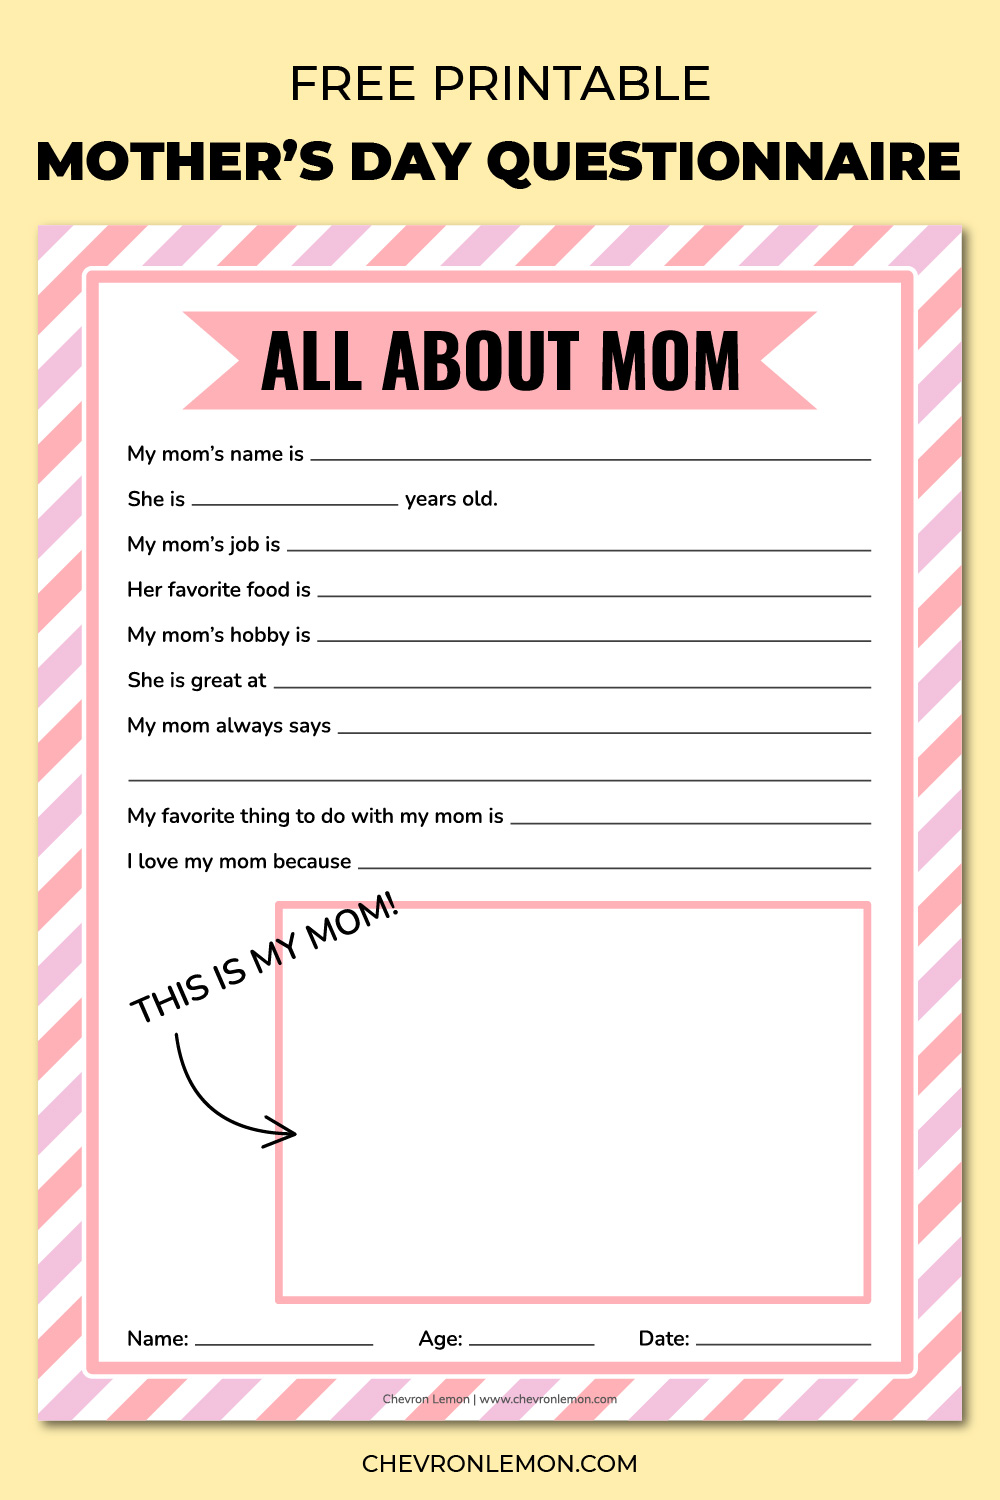 Printable Mother's Day questionnaire